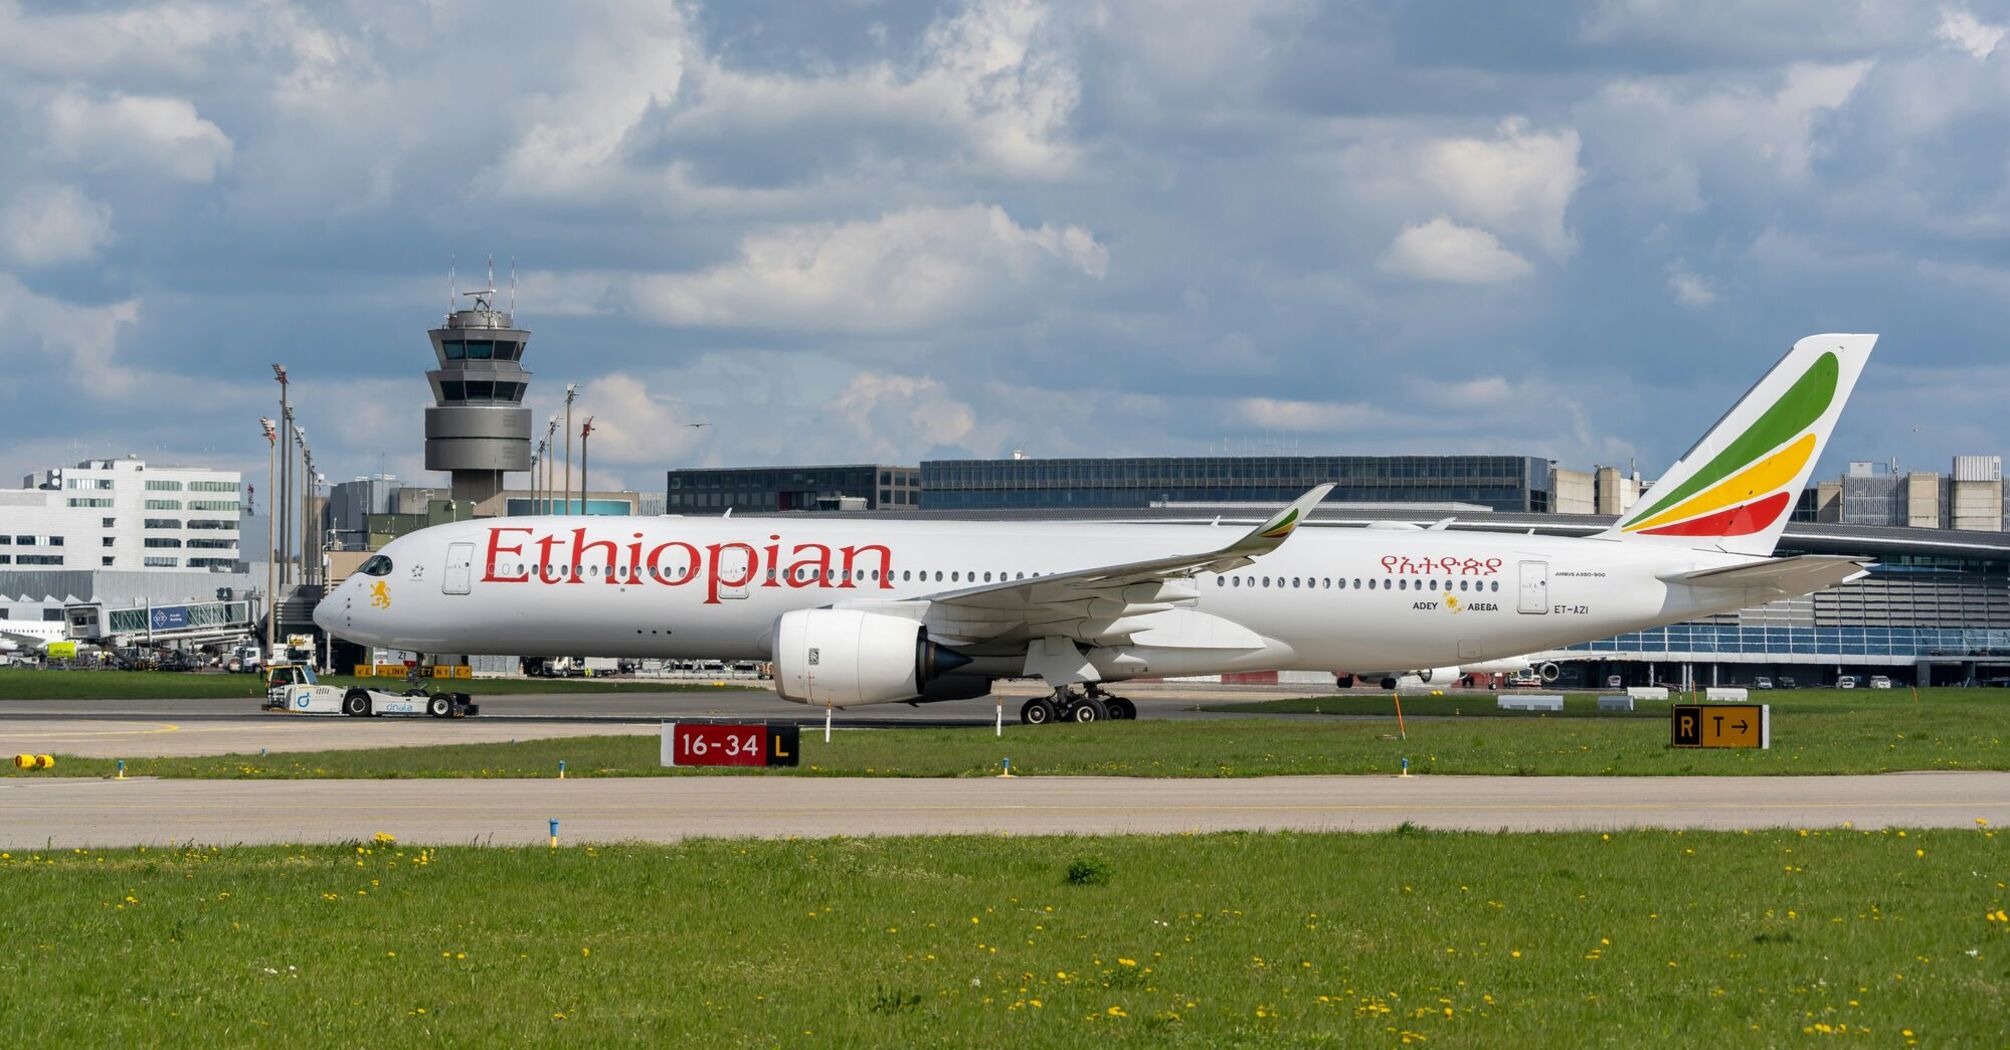 Ethiopian Airlines plane on the runway